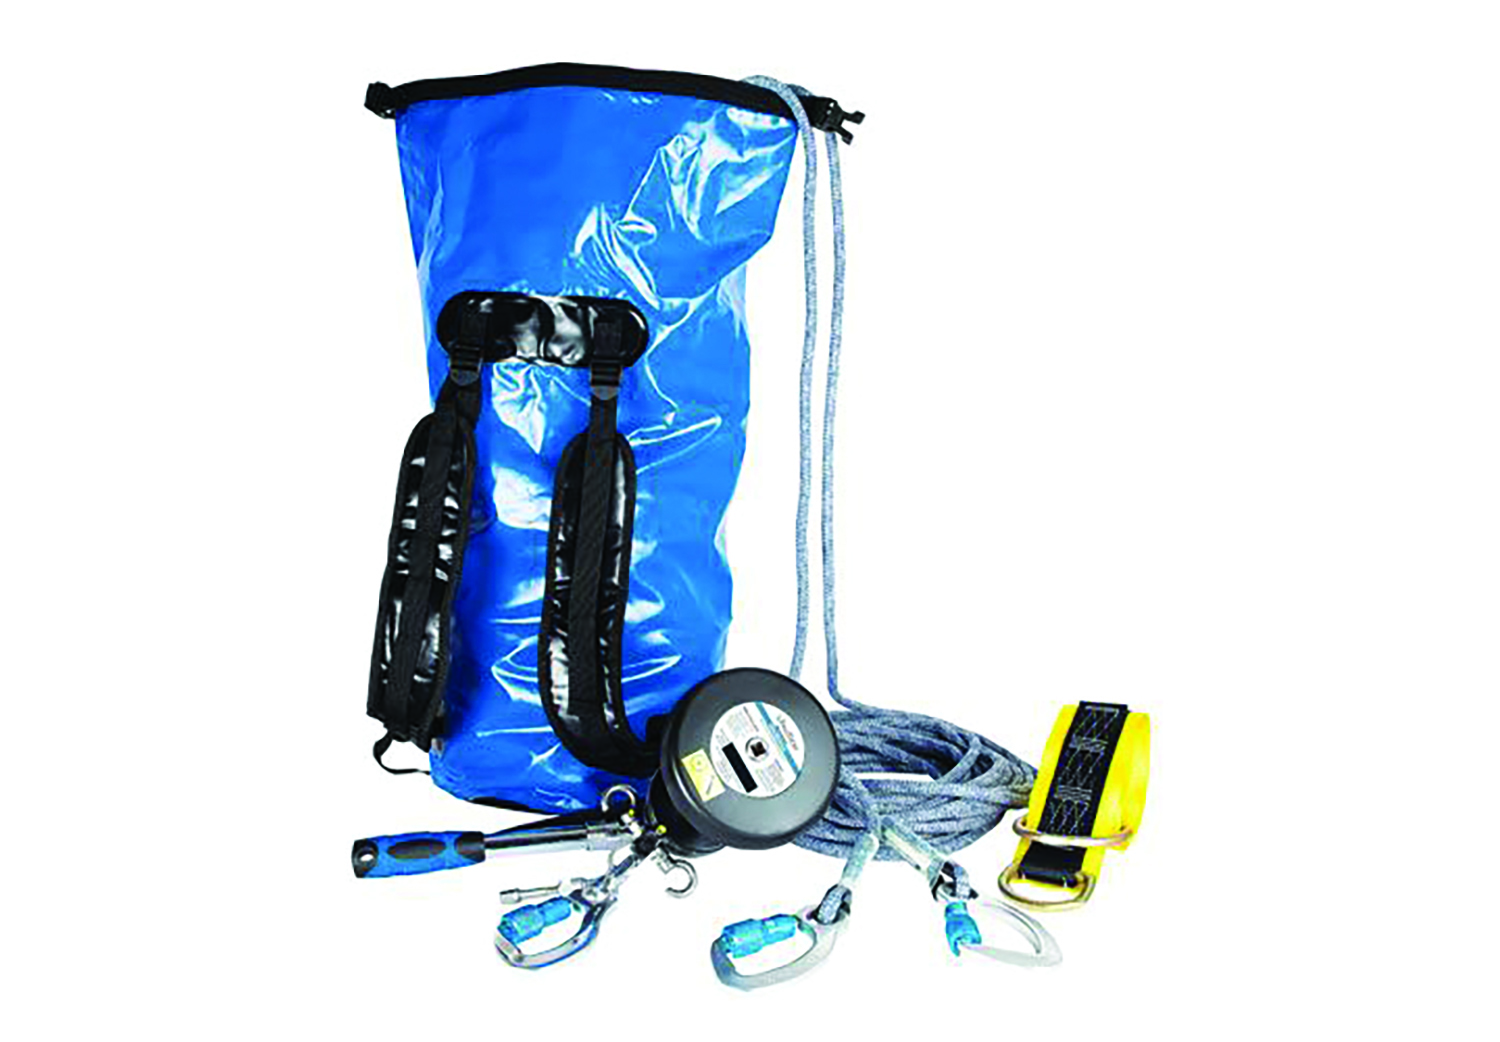 A blue rescue kit. Image by FallTech.